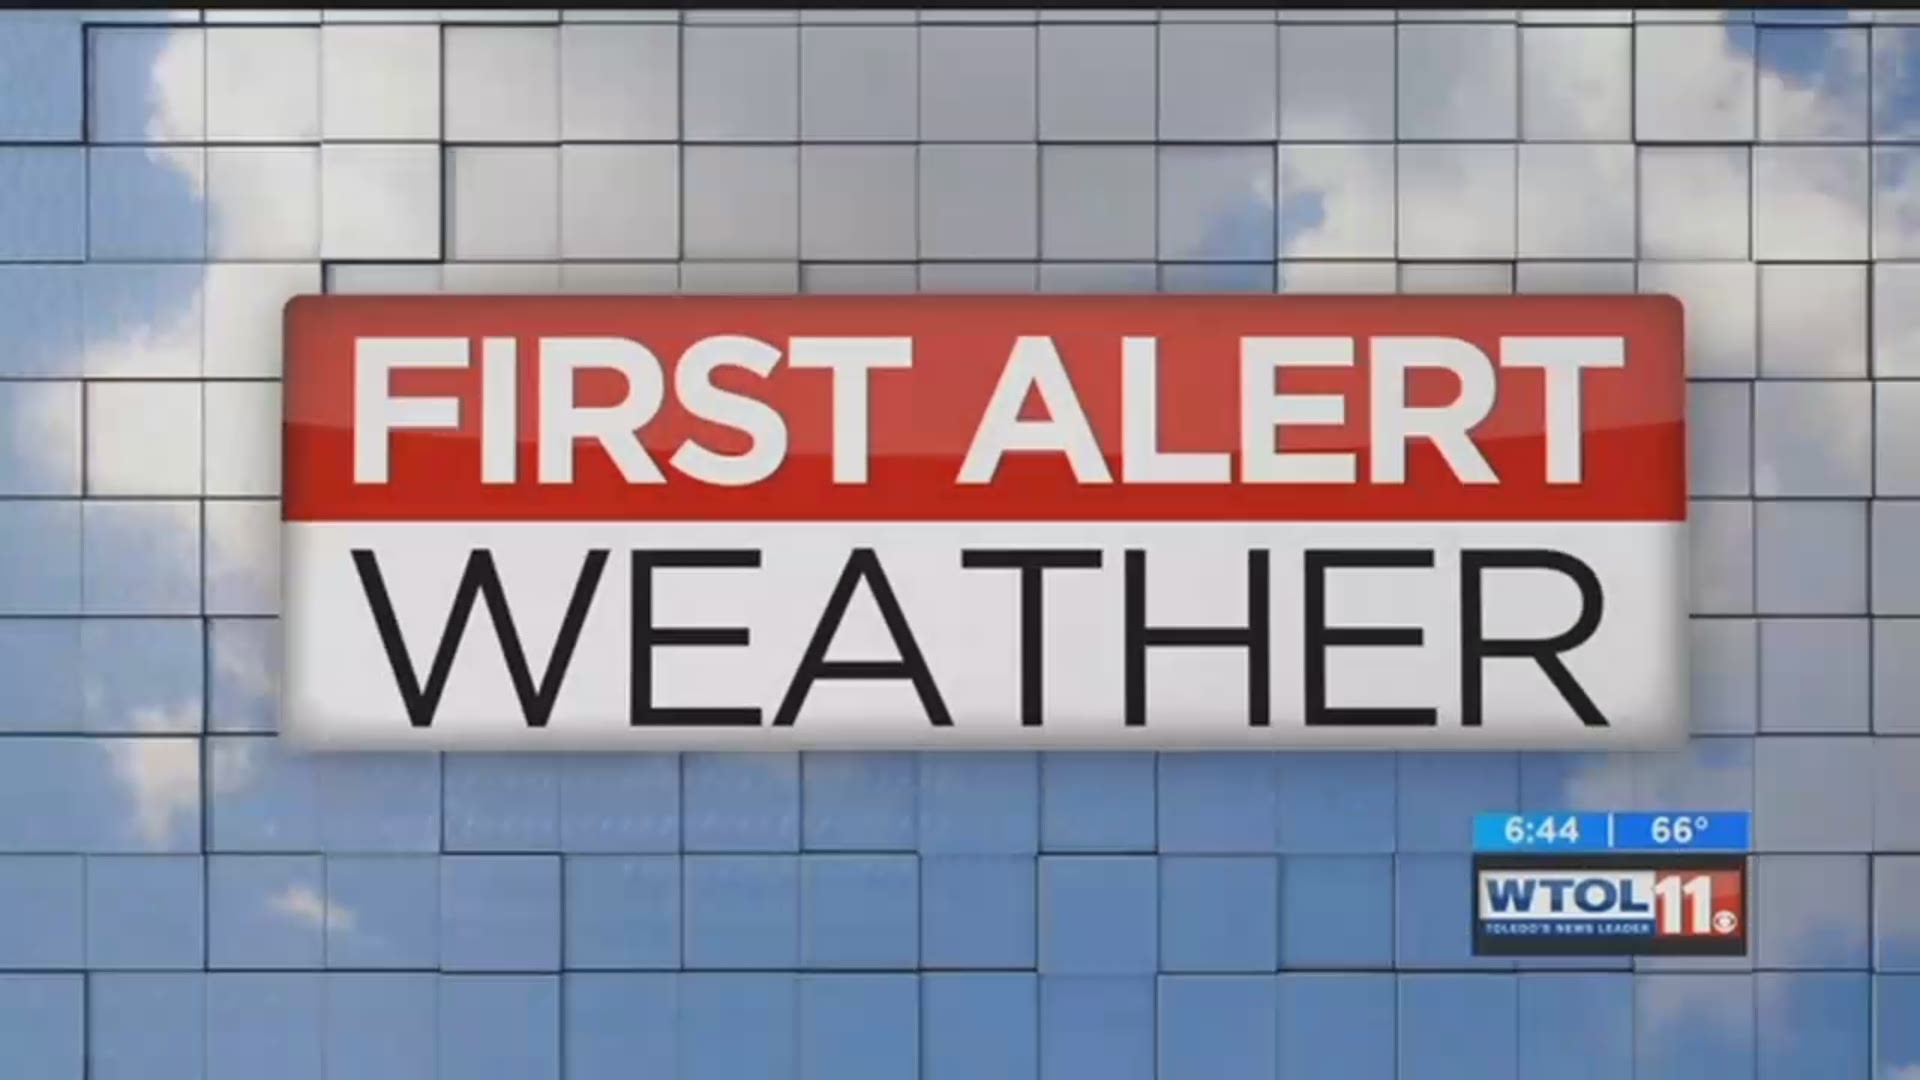 First Alert Forecast: Rainy weekend brings cooler temperatures